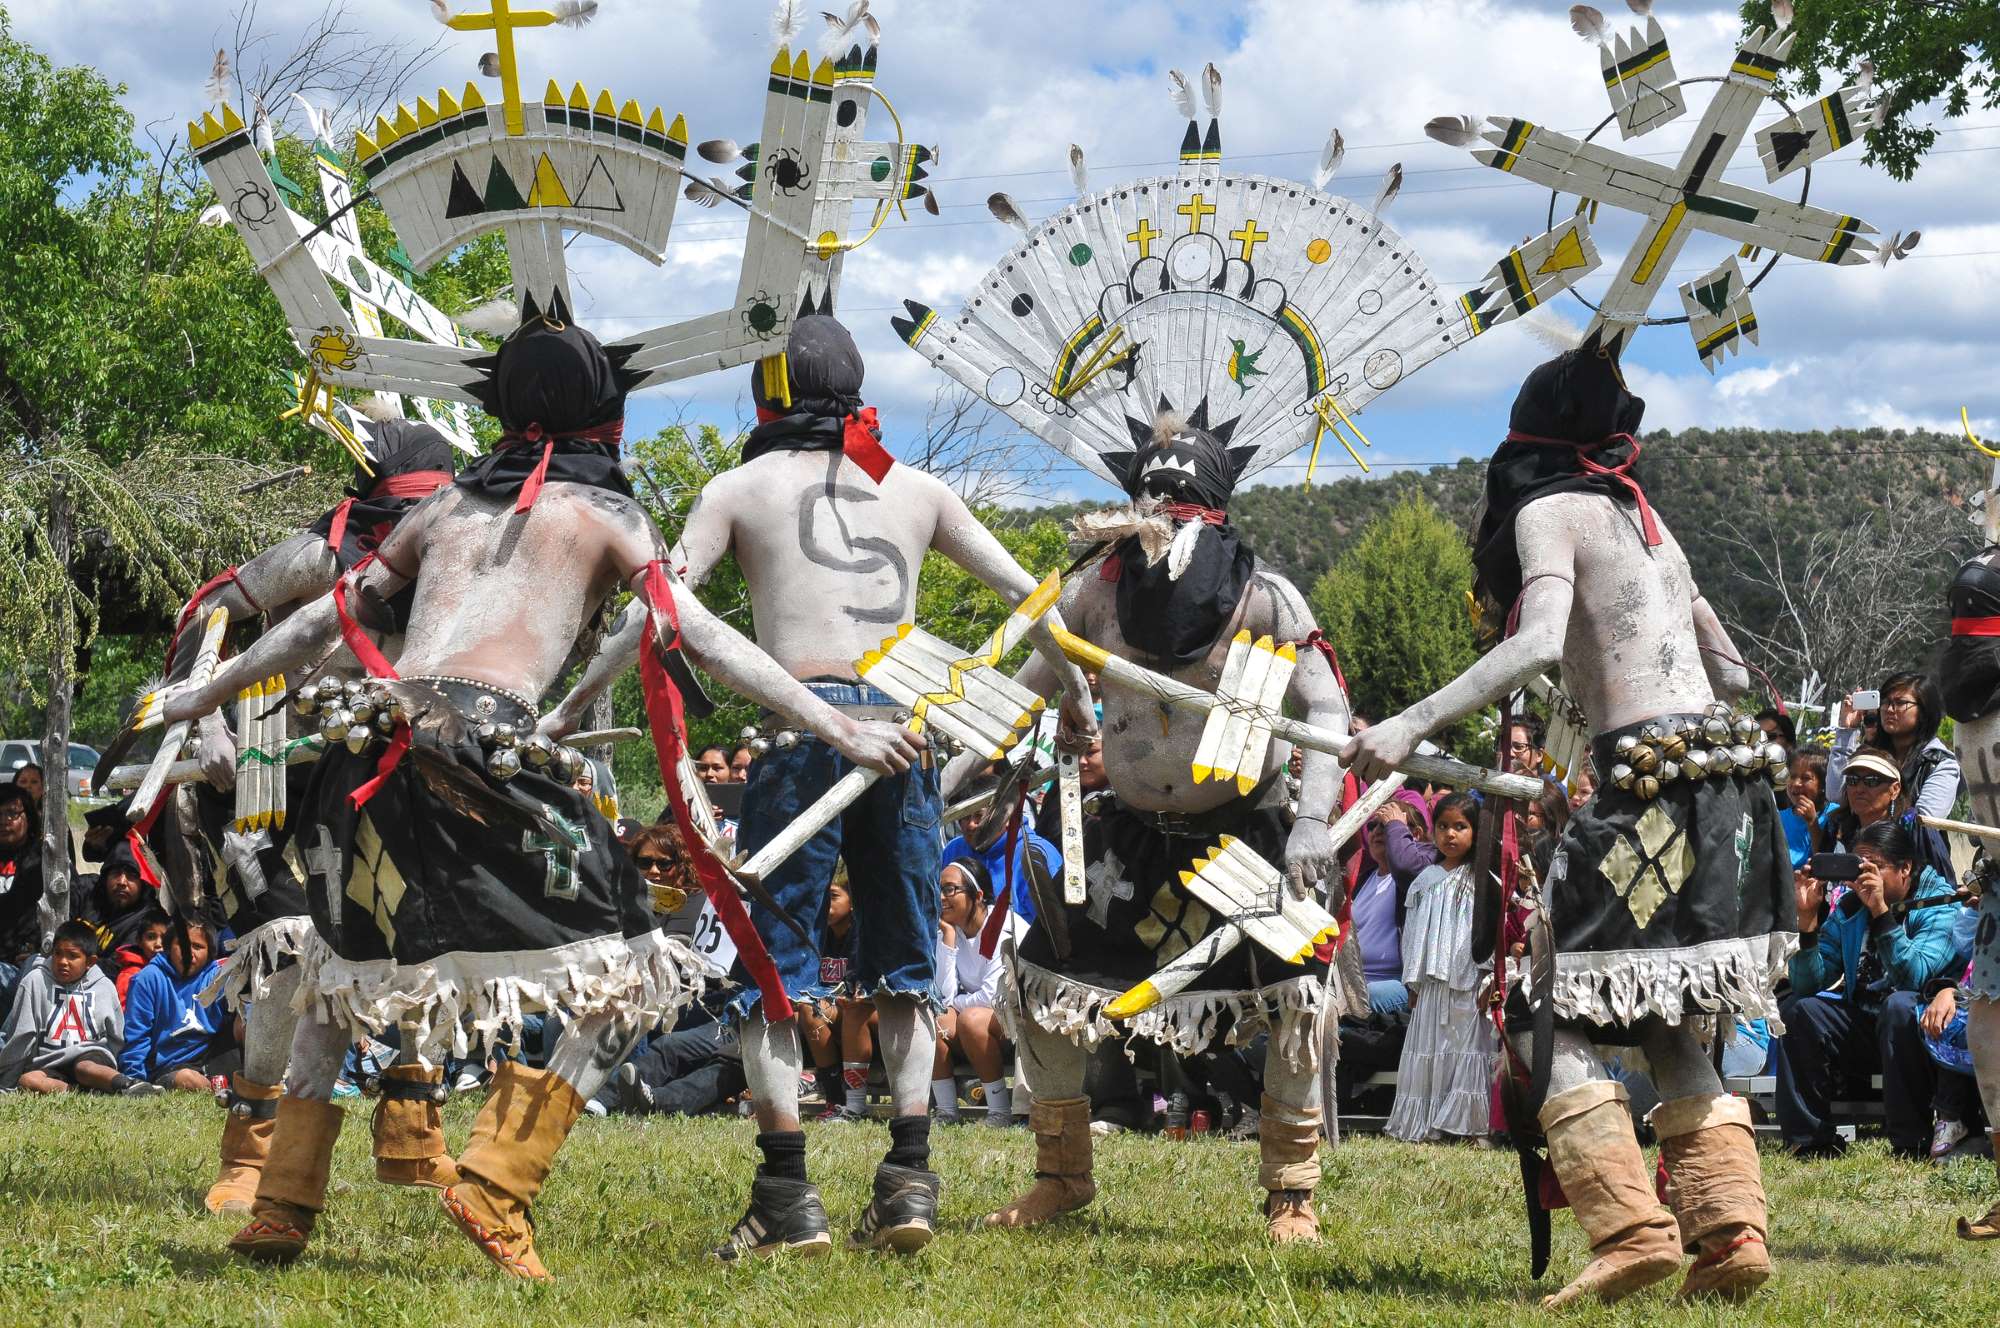 Dancers and Community Members at the Annual Celebration at Fort Apache, May 9, 2015. Image: John R. Welch